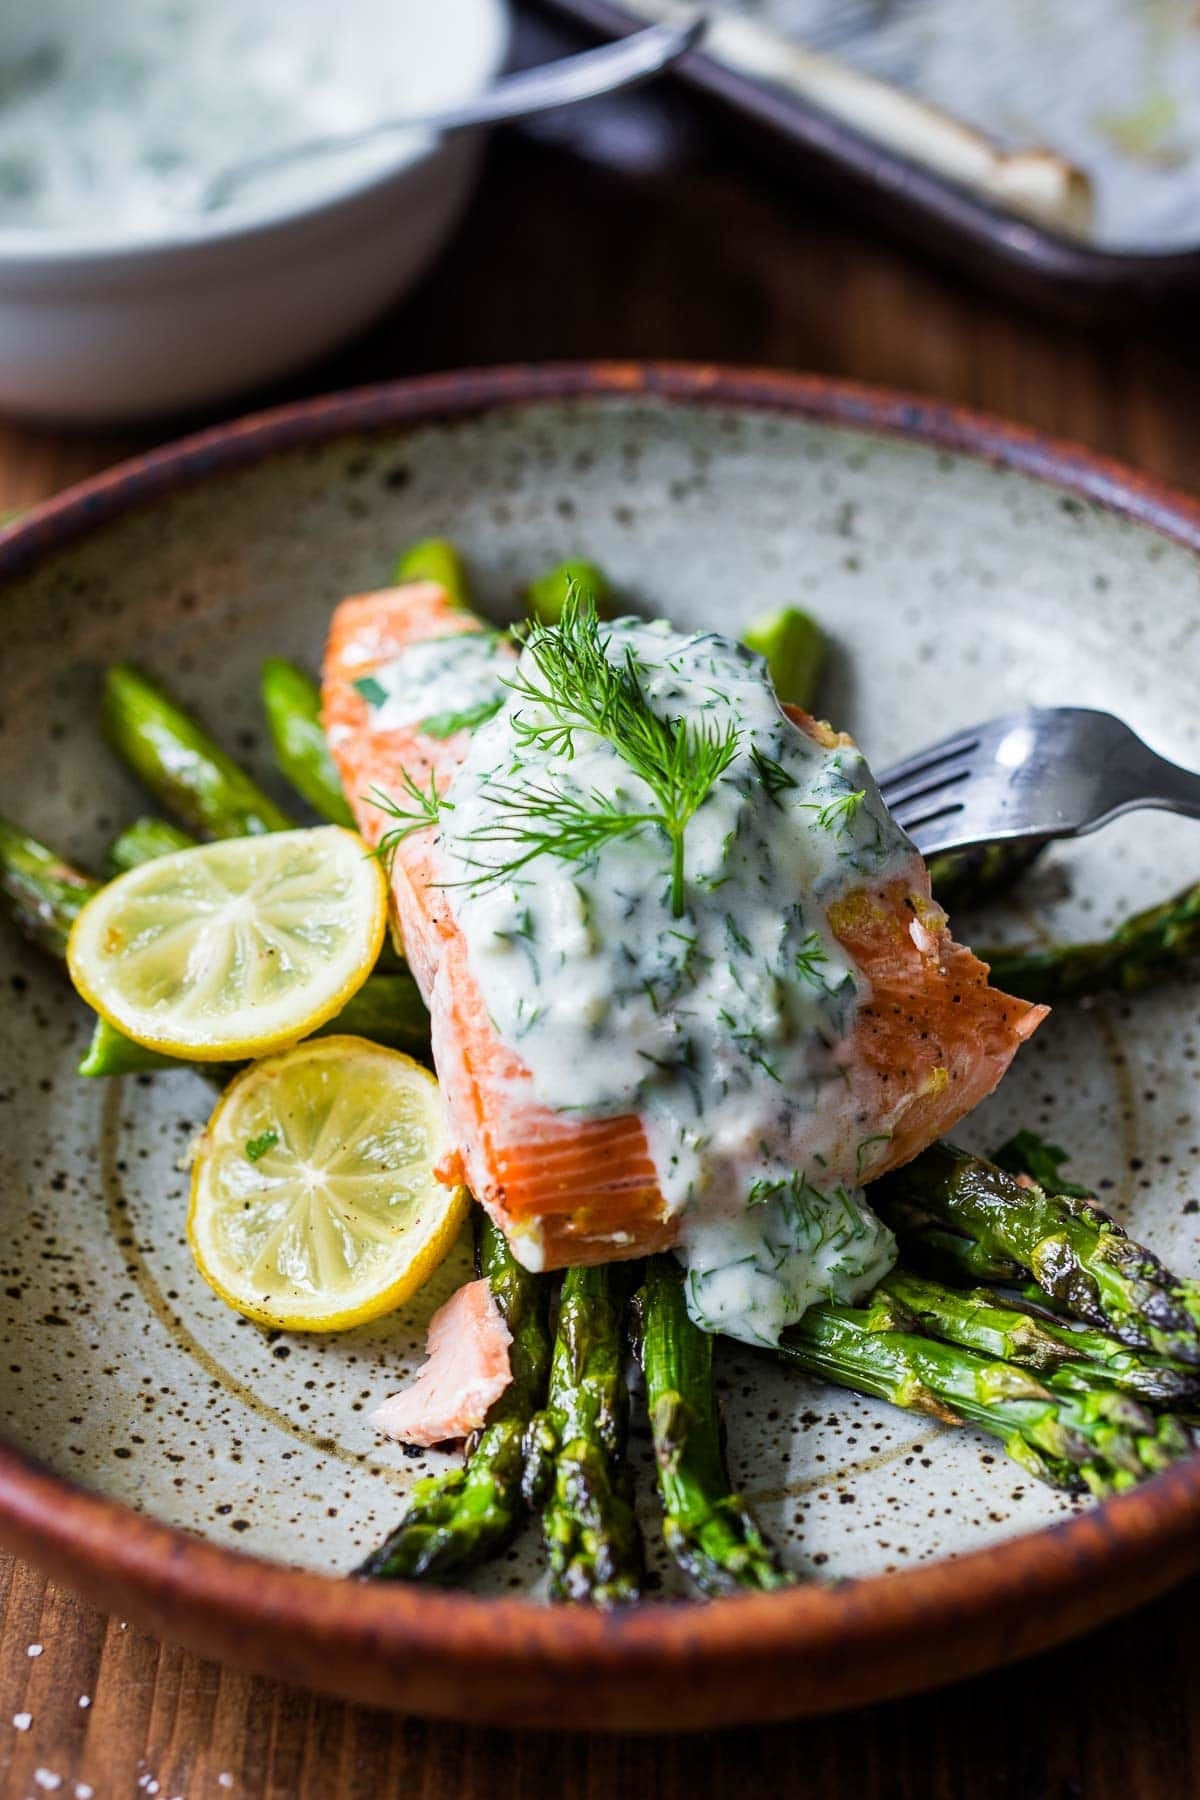 Grilled salmon with asparagus topped with dill sauce and lemon slices on a plate with a fork